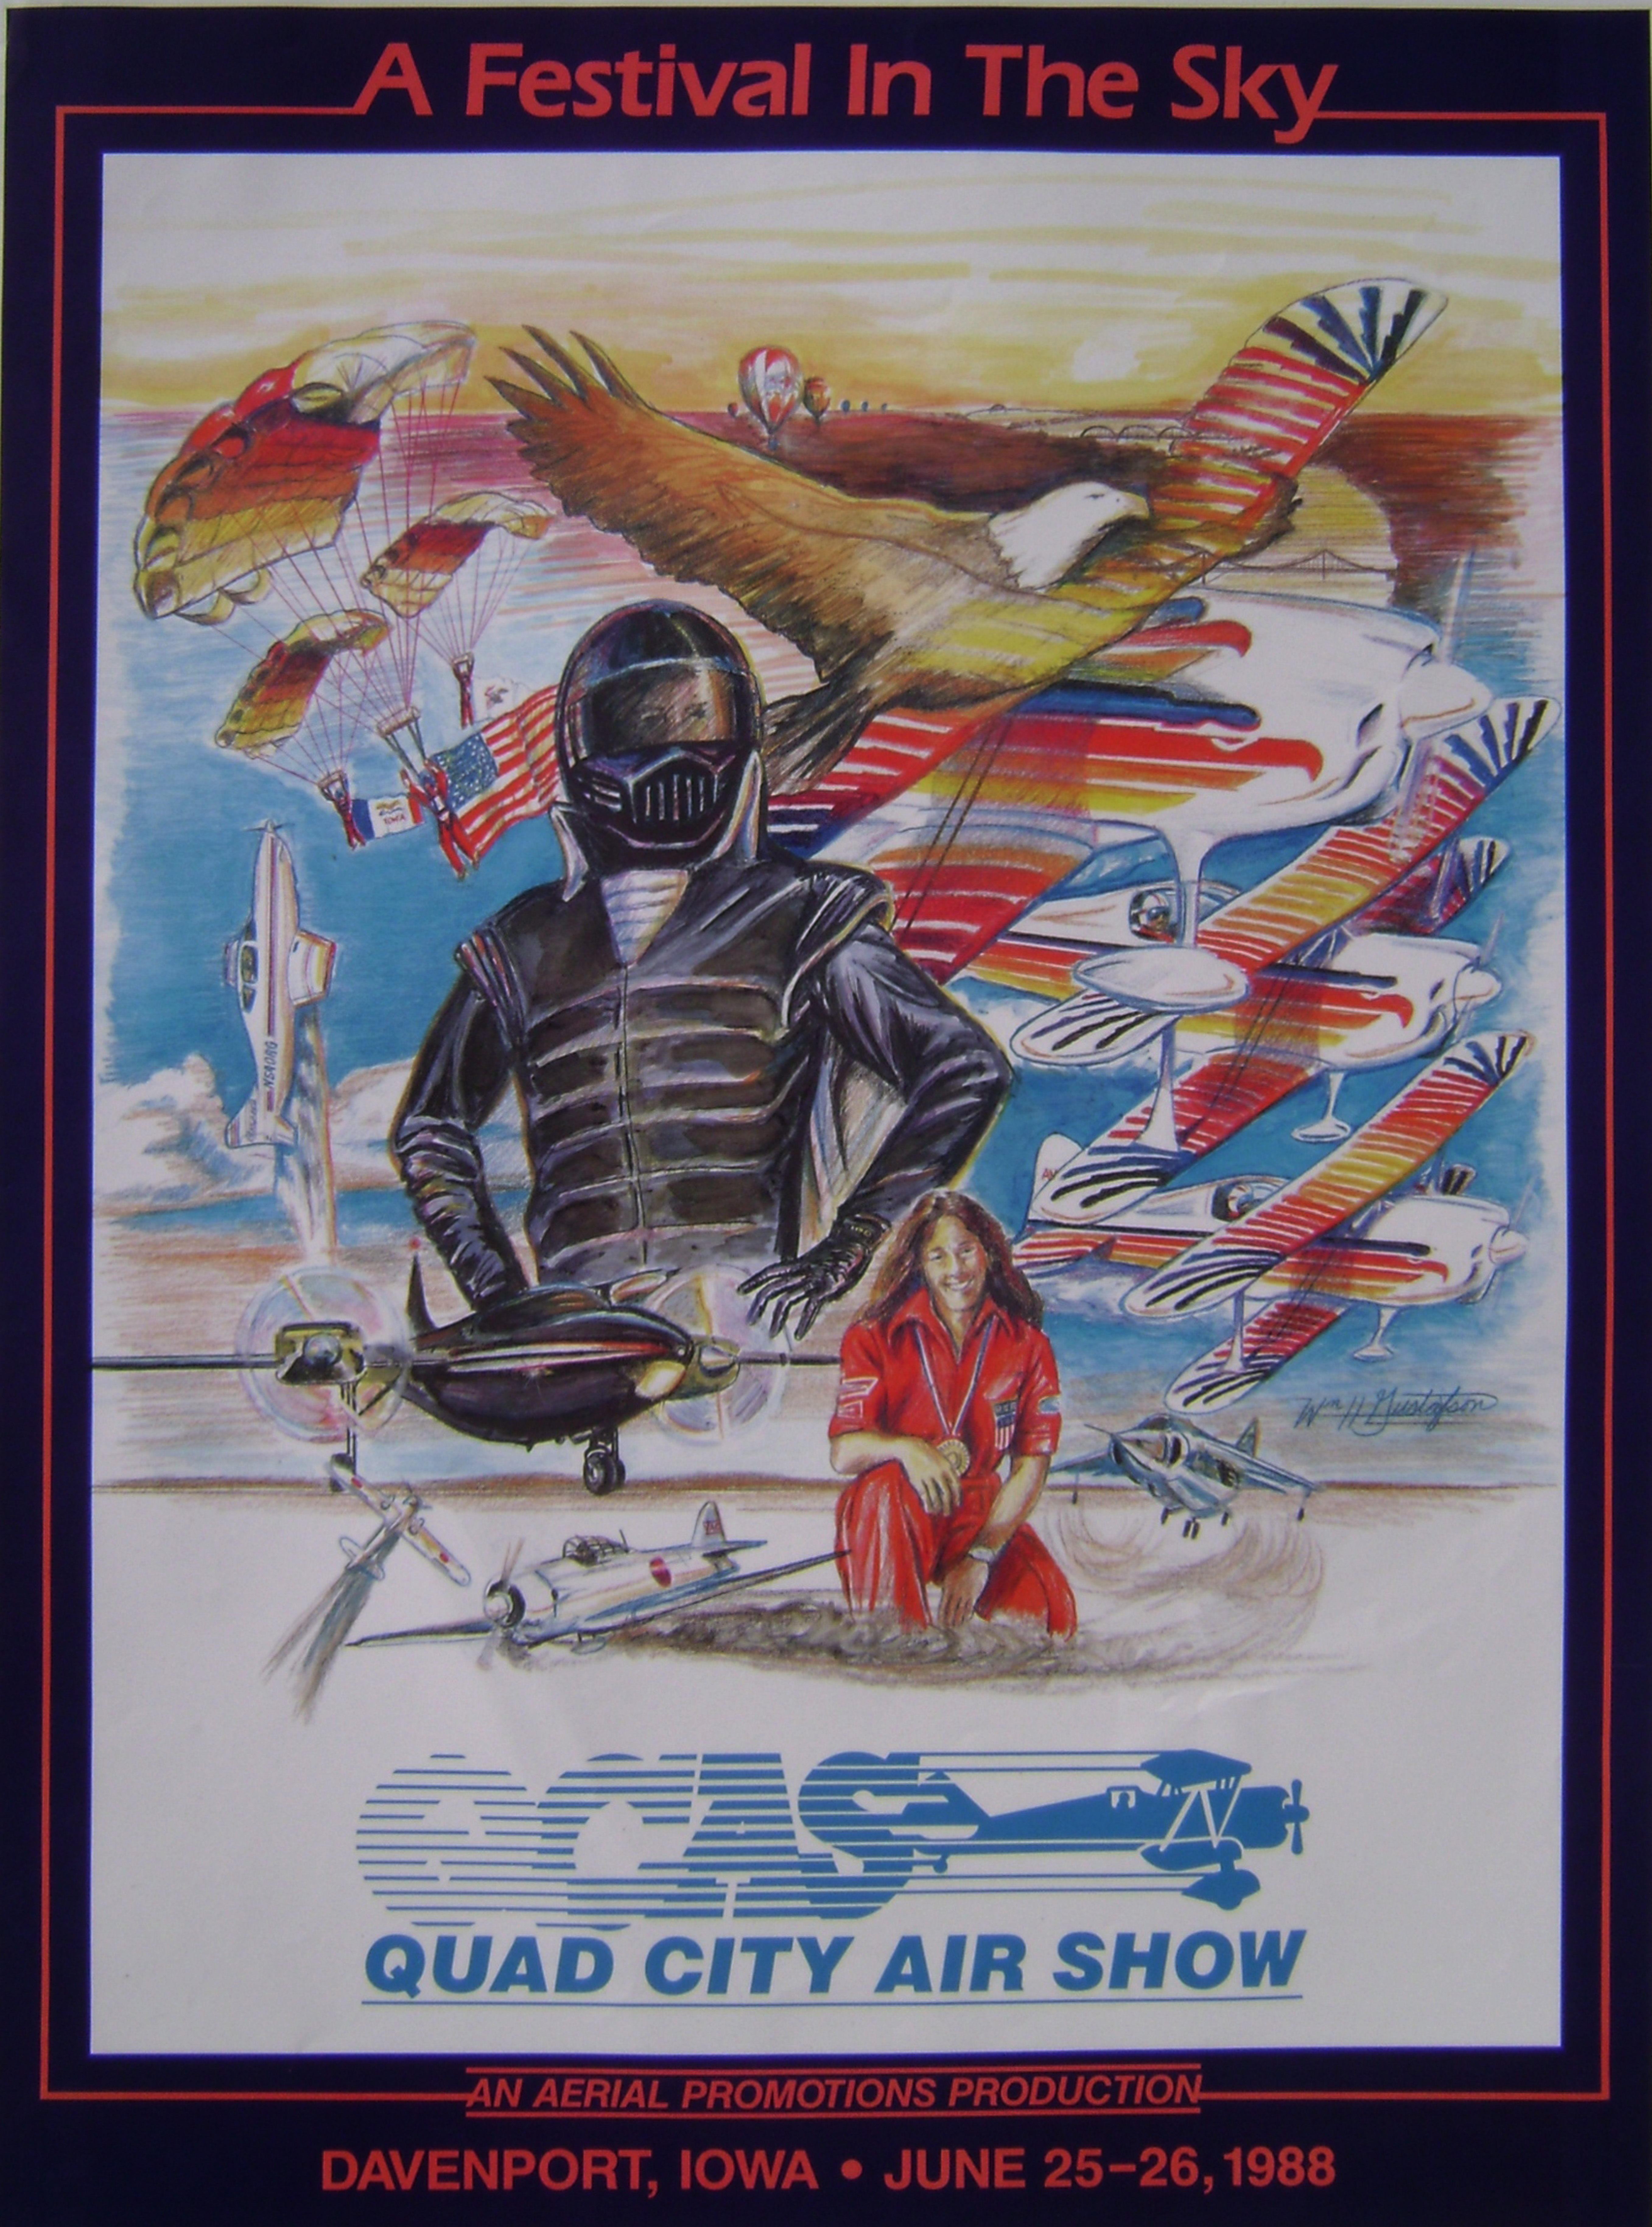 Illustration for the 1988 Quad City Air Show